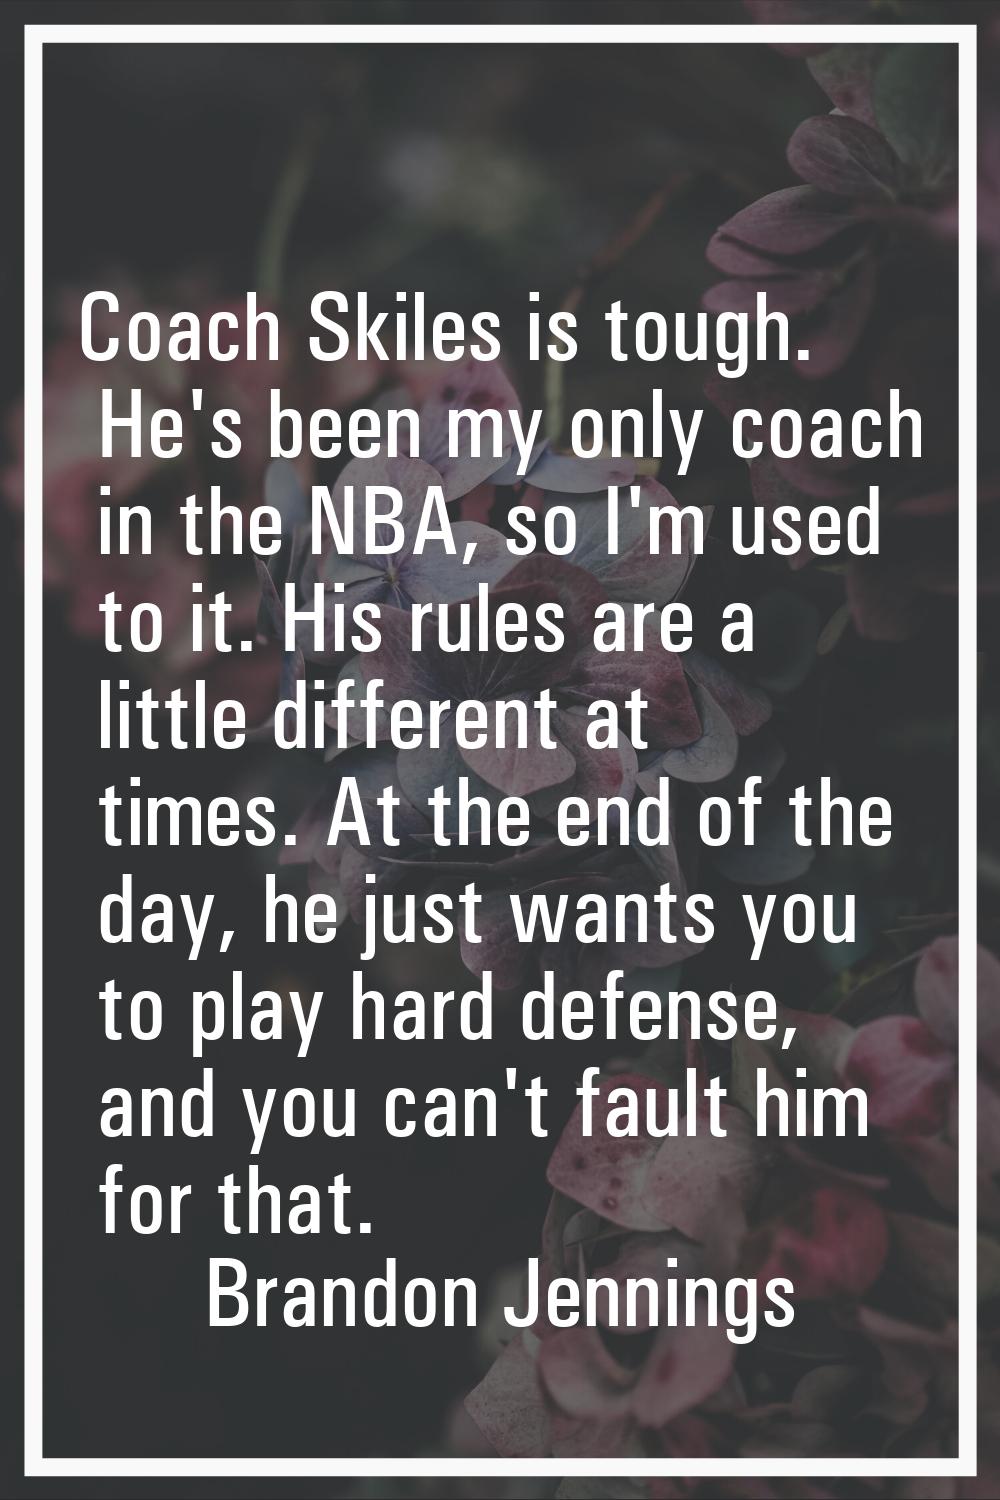 Coach Skiles is tough. He's been my only coach in the NBA, so I'm used to it. His rules are a littl